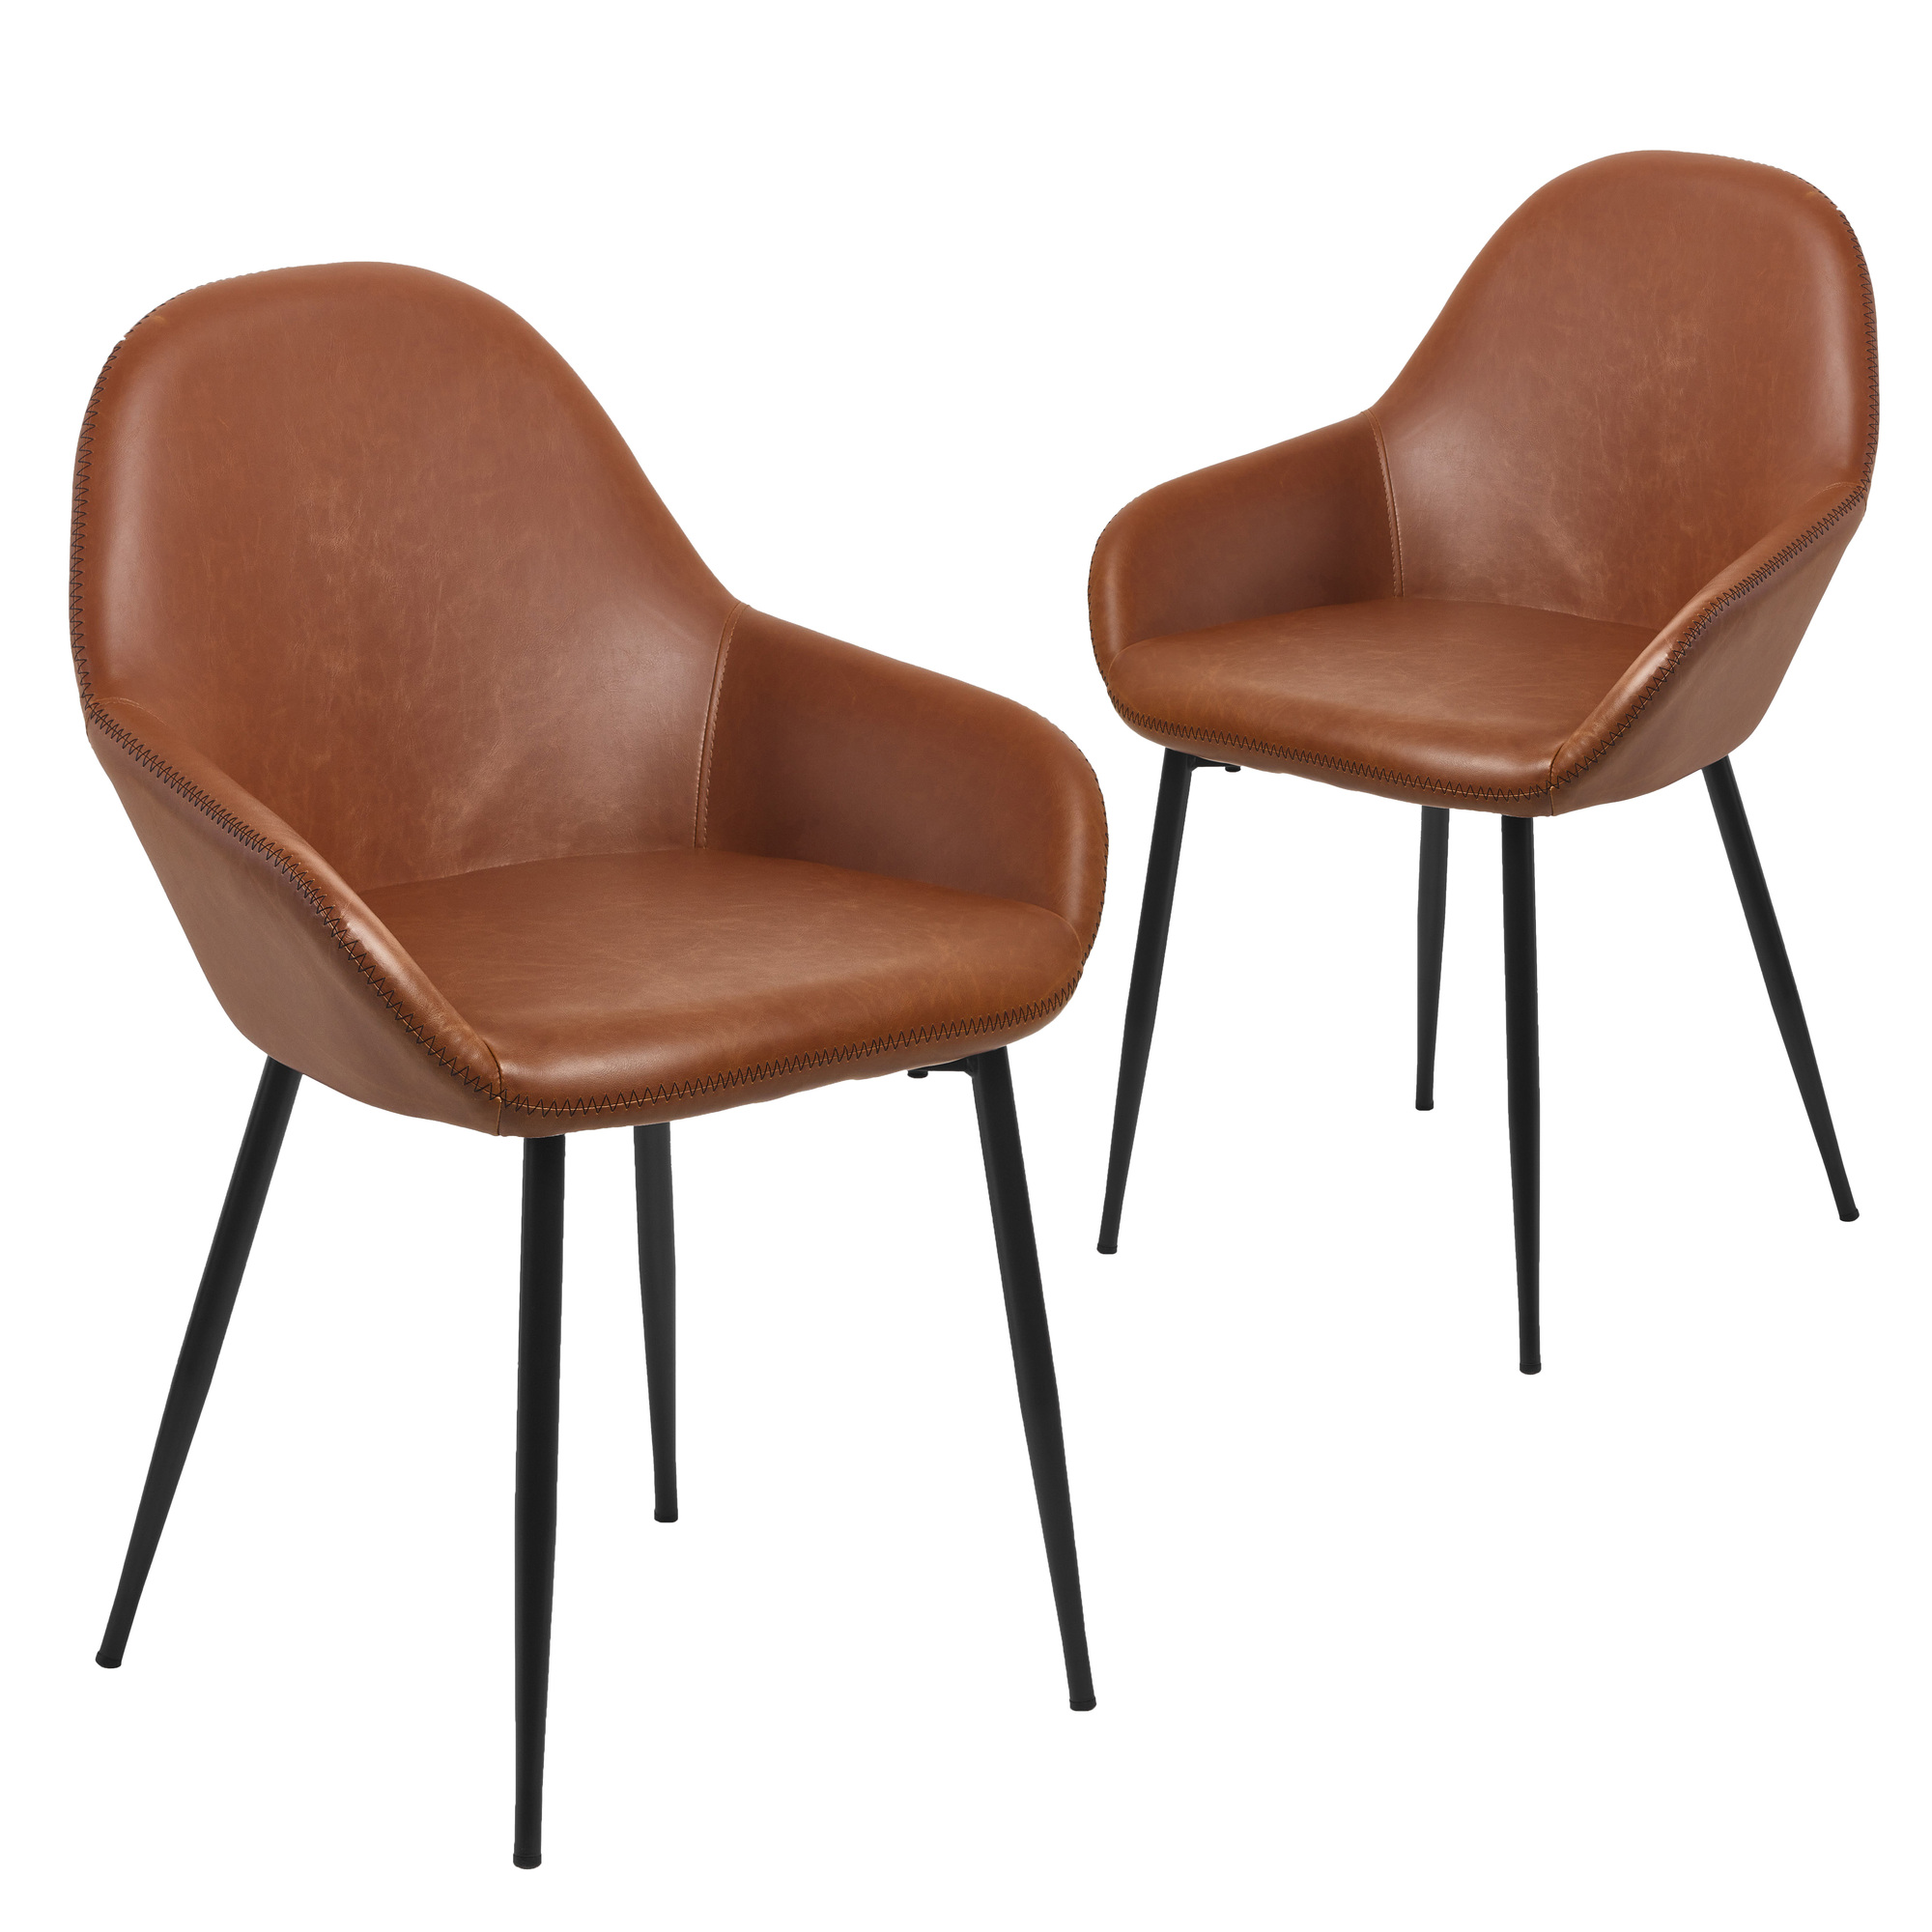 Temple Webster Tan Frankie Faux Leather Dining Chairs Reviews